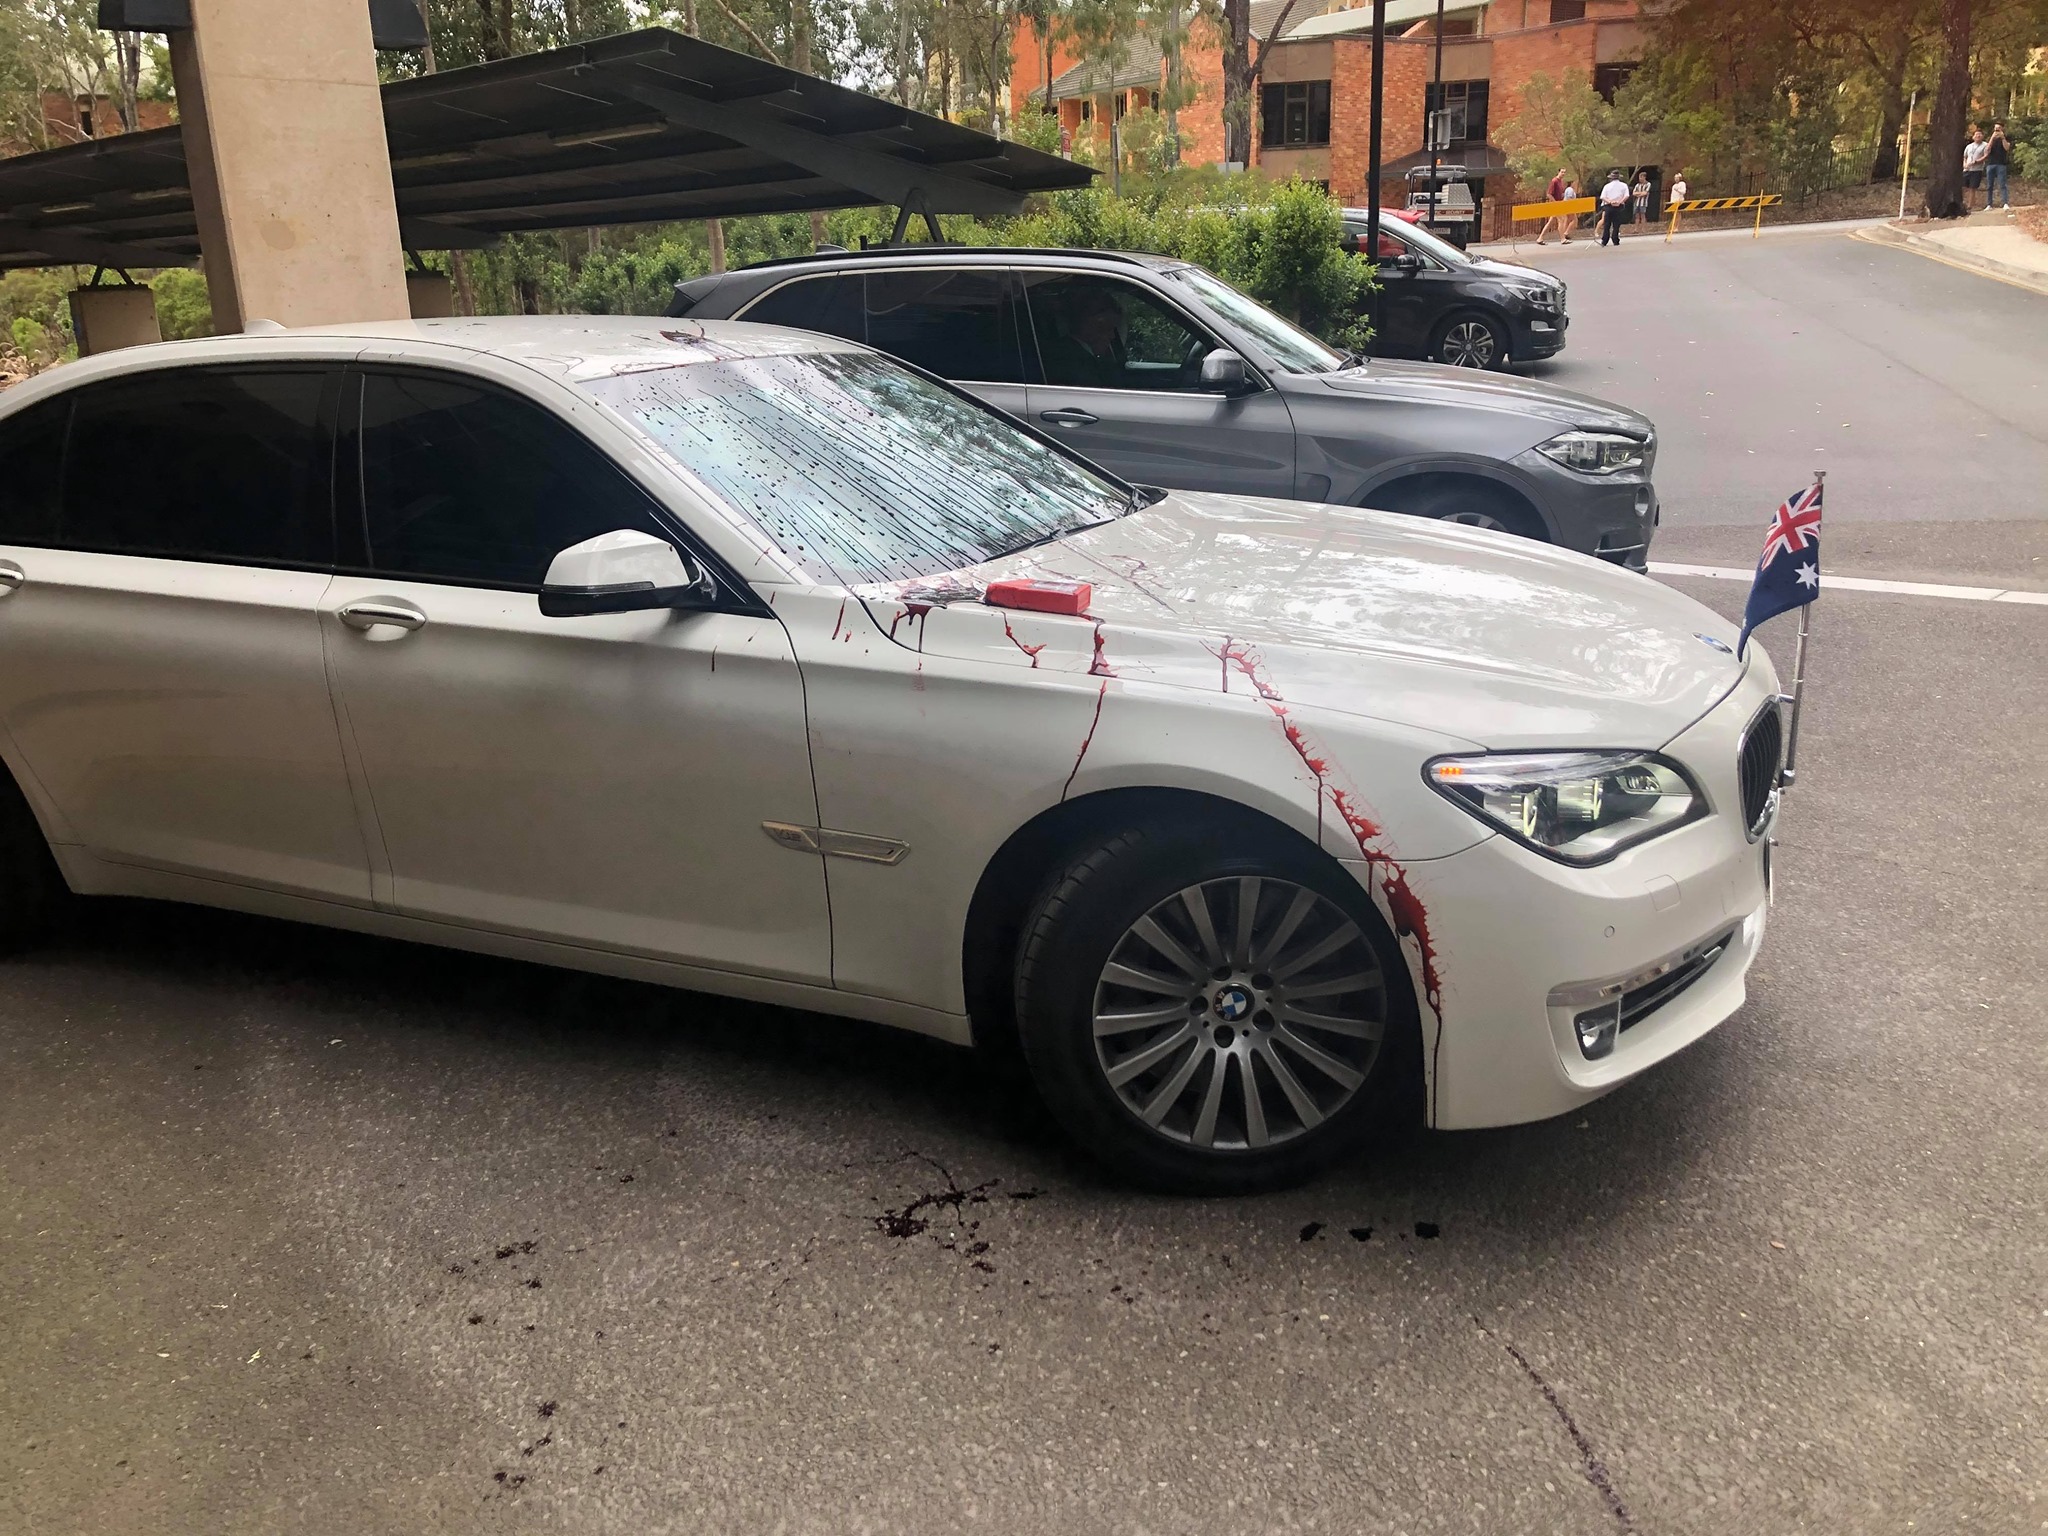 The PM’s car doused in blood